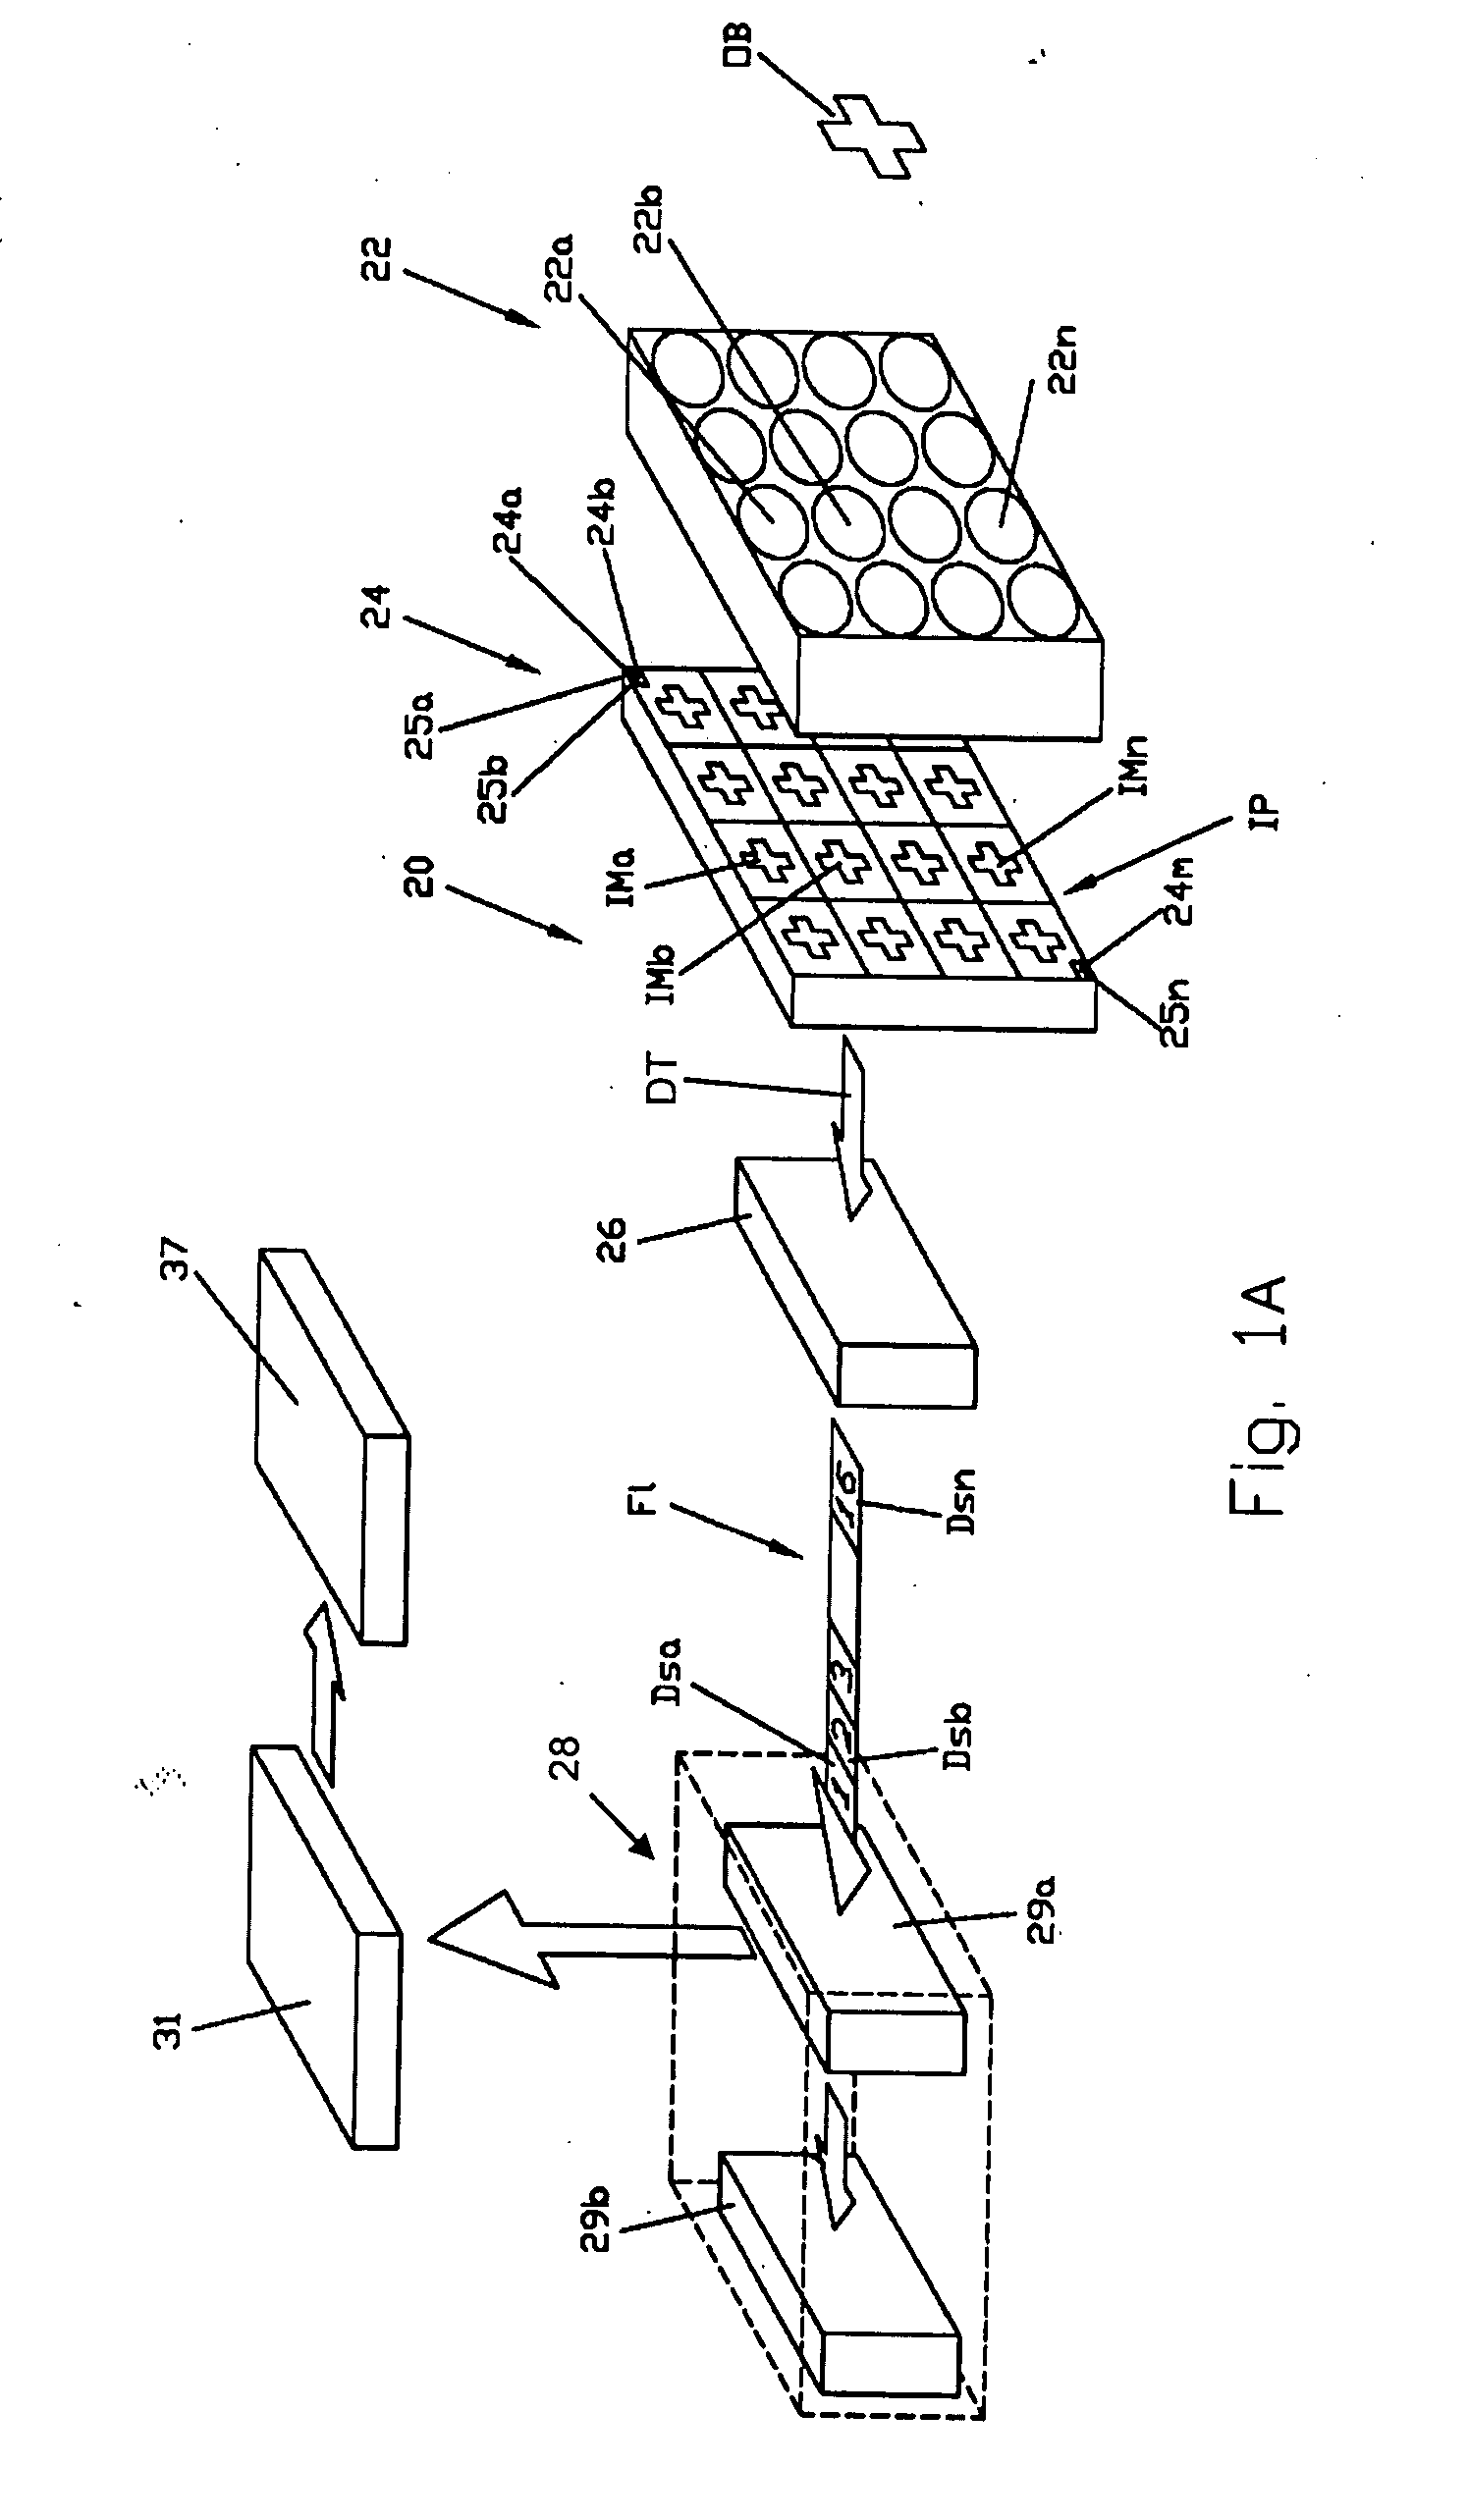 Ultra-thin digital imaging device of high resolution for mobile electronic devices and method of imaging